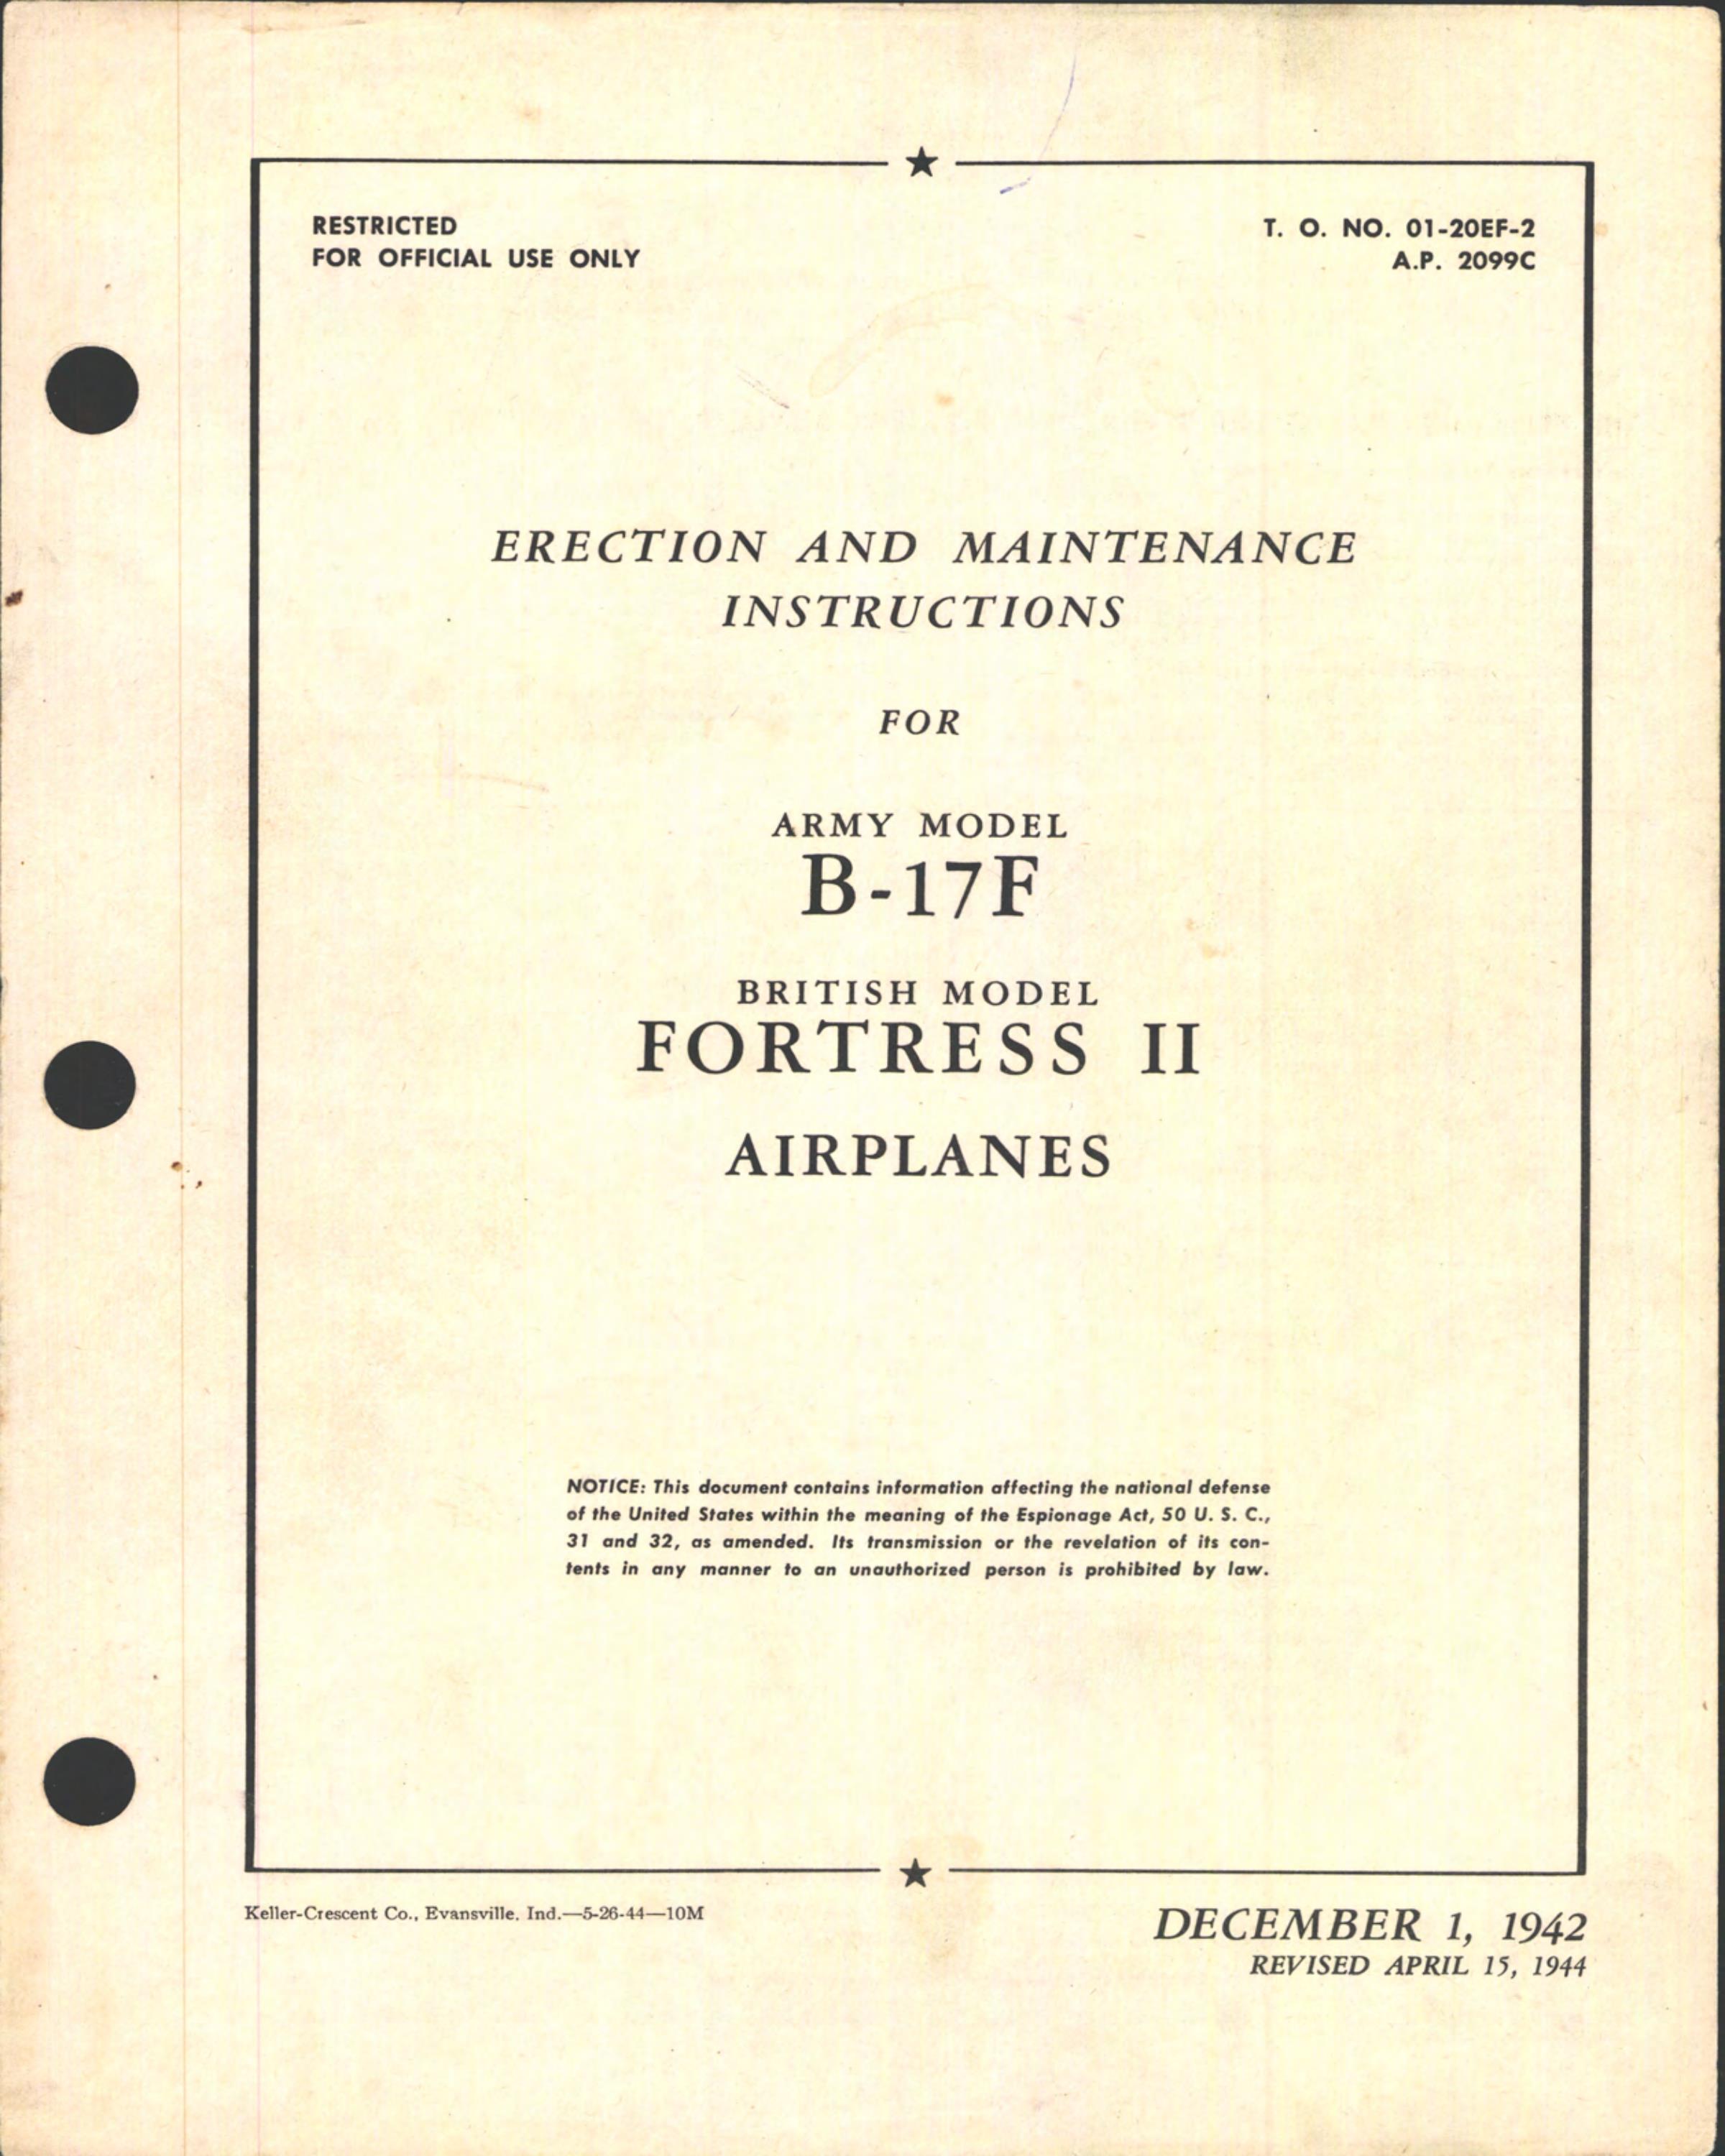 Sample page 1 from AirCorps Library document: Erection & Maintenance Instructions for B-17F